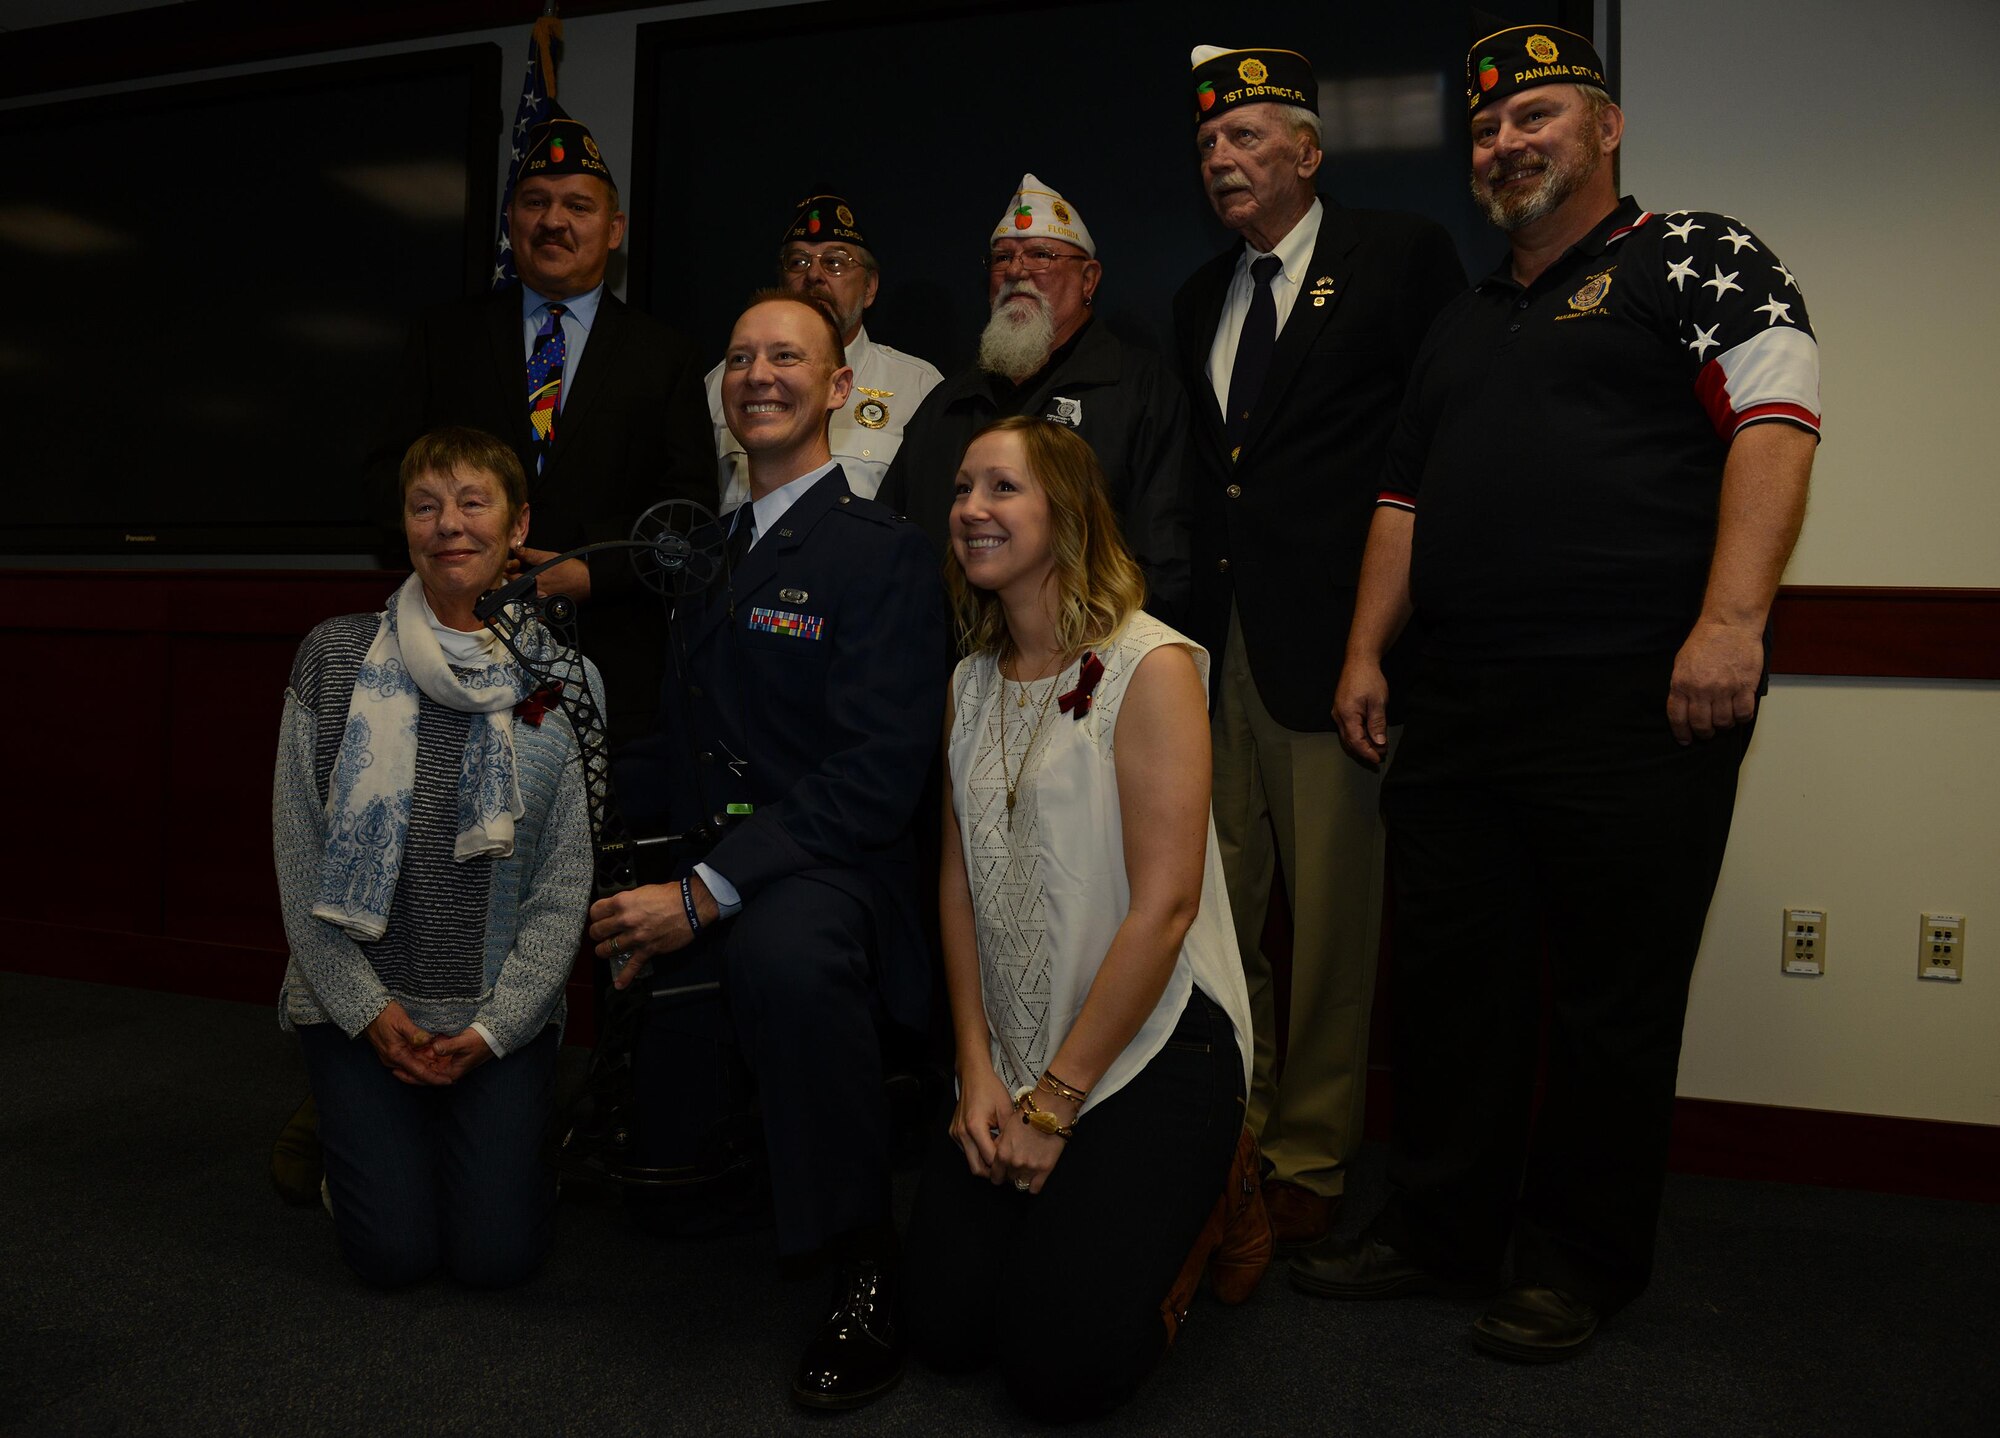 Capt. Chris Cochrane poses for a group photo with his family and the Florida Legionnaires during a presentation ceremony at Hurlburt Field, Fla., on Jan 28, 2016. Cochrane, who suffered a stroke in 2013 that left him paralyzed on his right side, recieved a adaptive compound bow. Cochrane, with his new bow, plans to participate in the upcoming Air Force Wounded Warrior trails at Nellis Air Force Base, Nev., in February. (U.S. Air Force photo/Chief Master Sgt. Quinton T. Burris) 